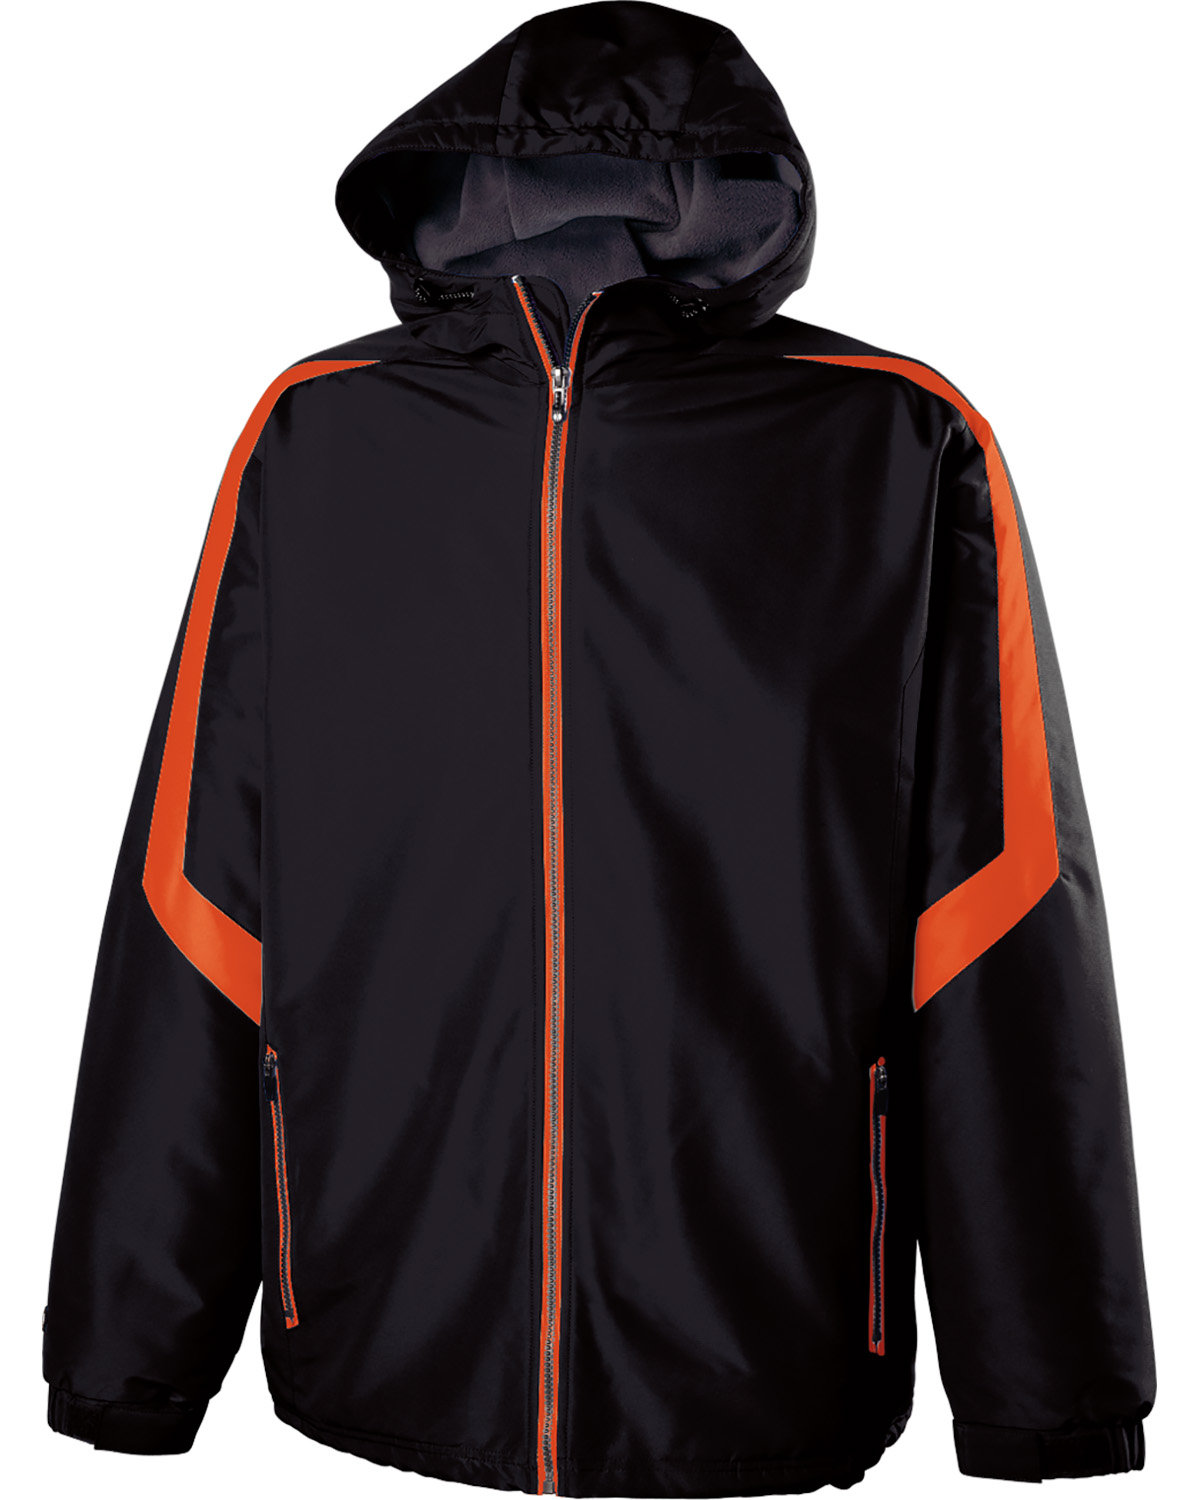 Adult Polyester Full Zip Charger Jacket-